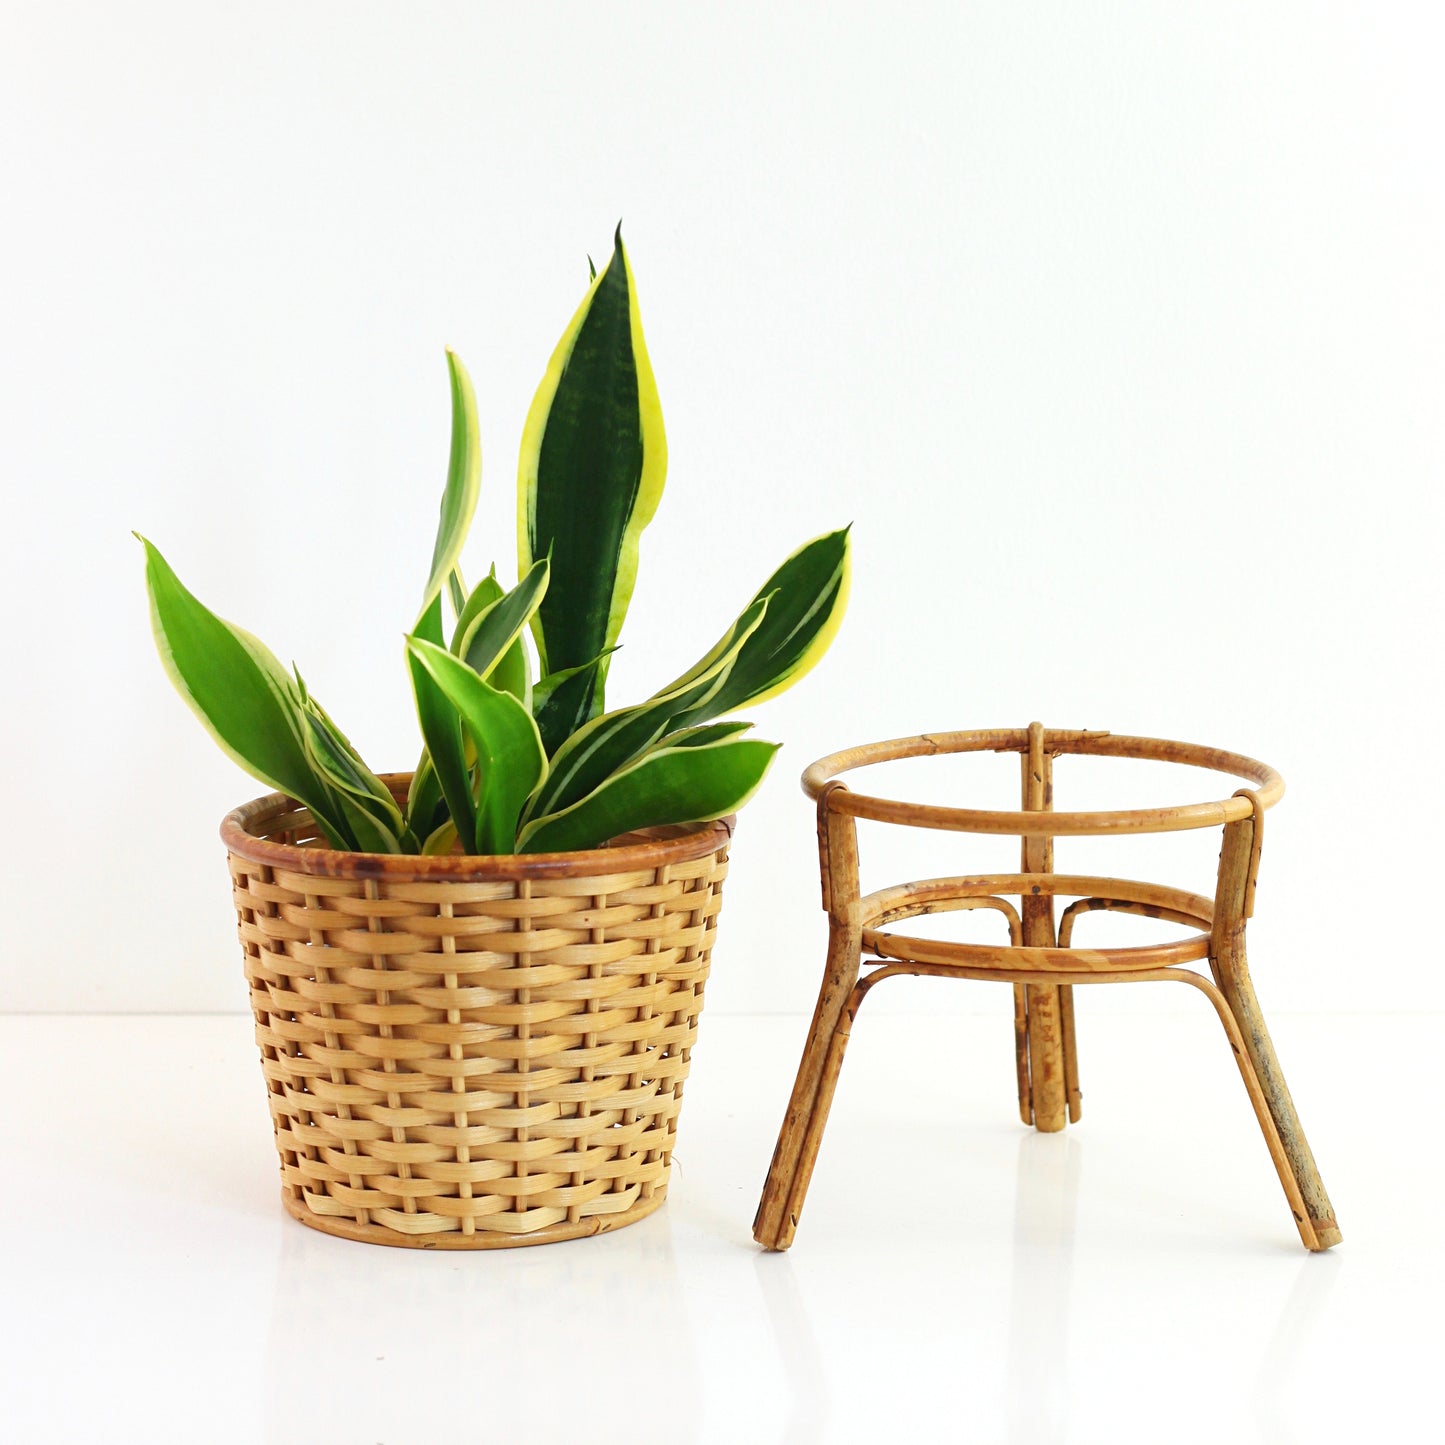 SOLD - Vintage Rattan Tripod Plant Stand with Wicker Basket